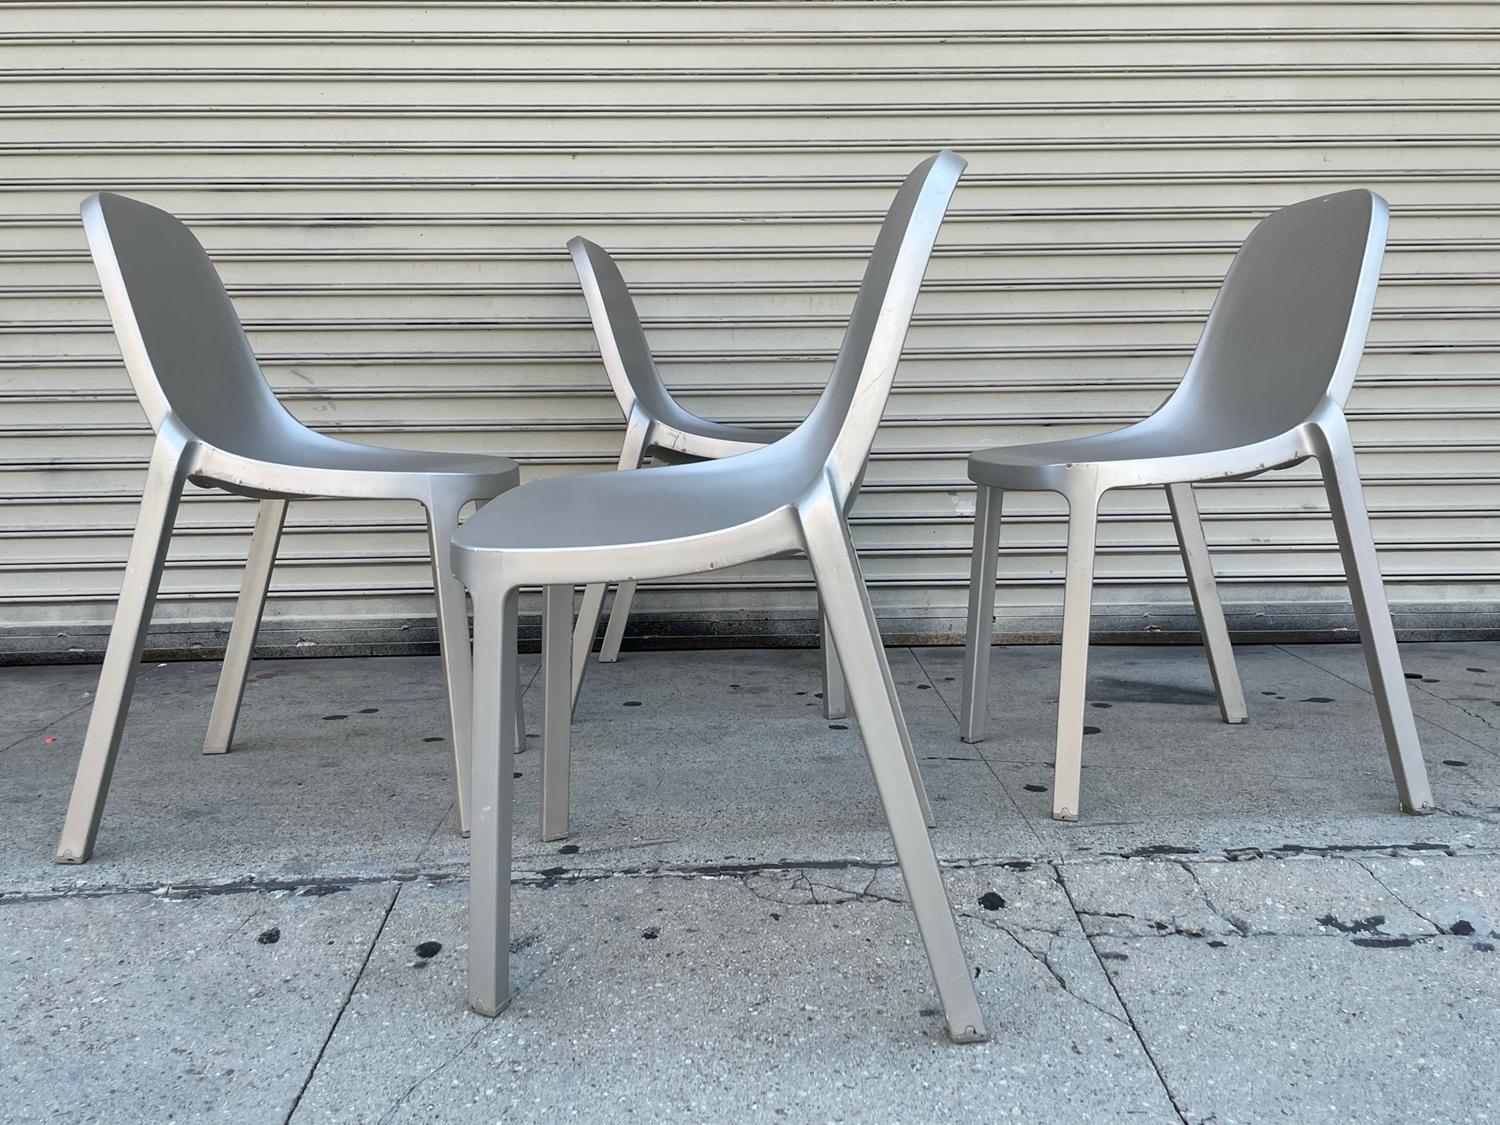 American Set of 4 Broom Chairs by Philippe Starck for Emeco